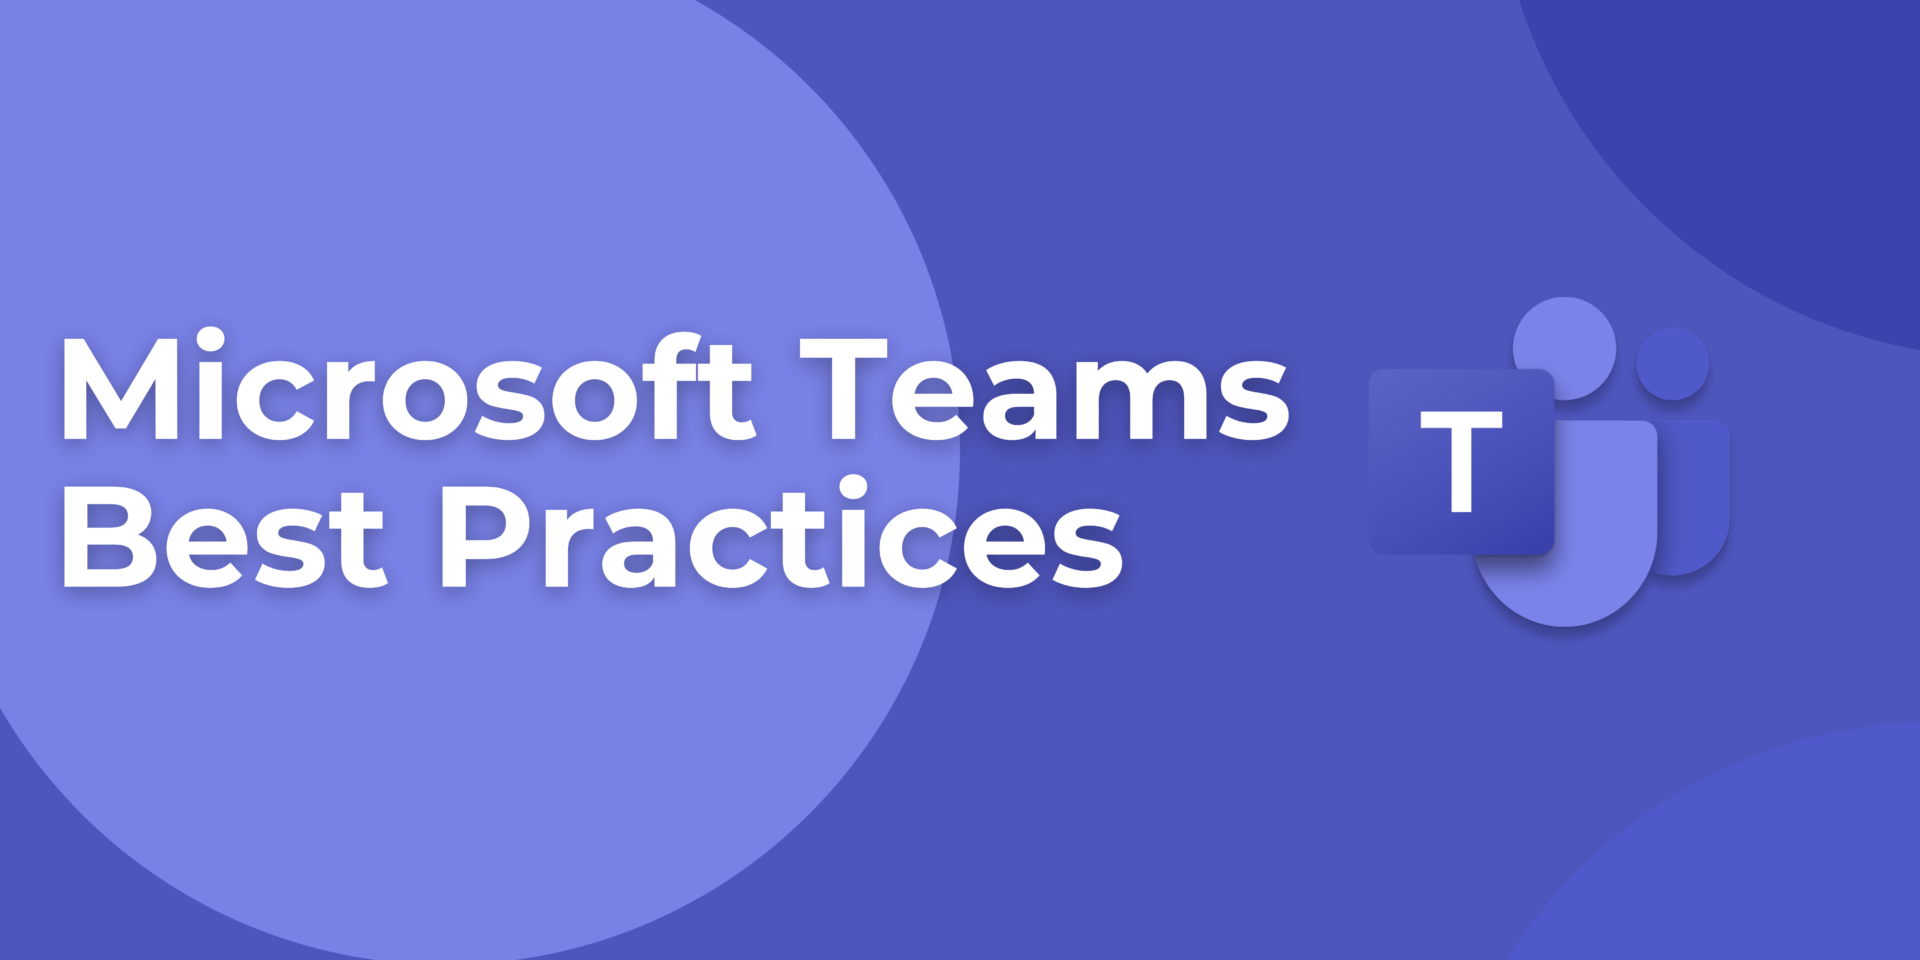 Microsoft Teams Best Practices Text With Purple Background And Teams Logo